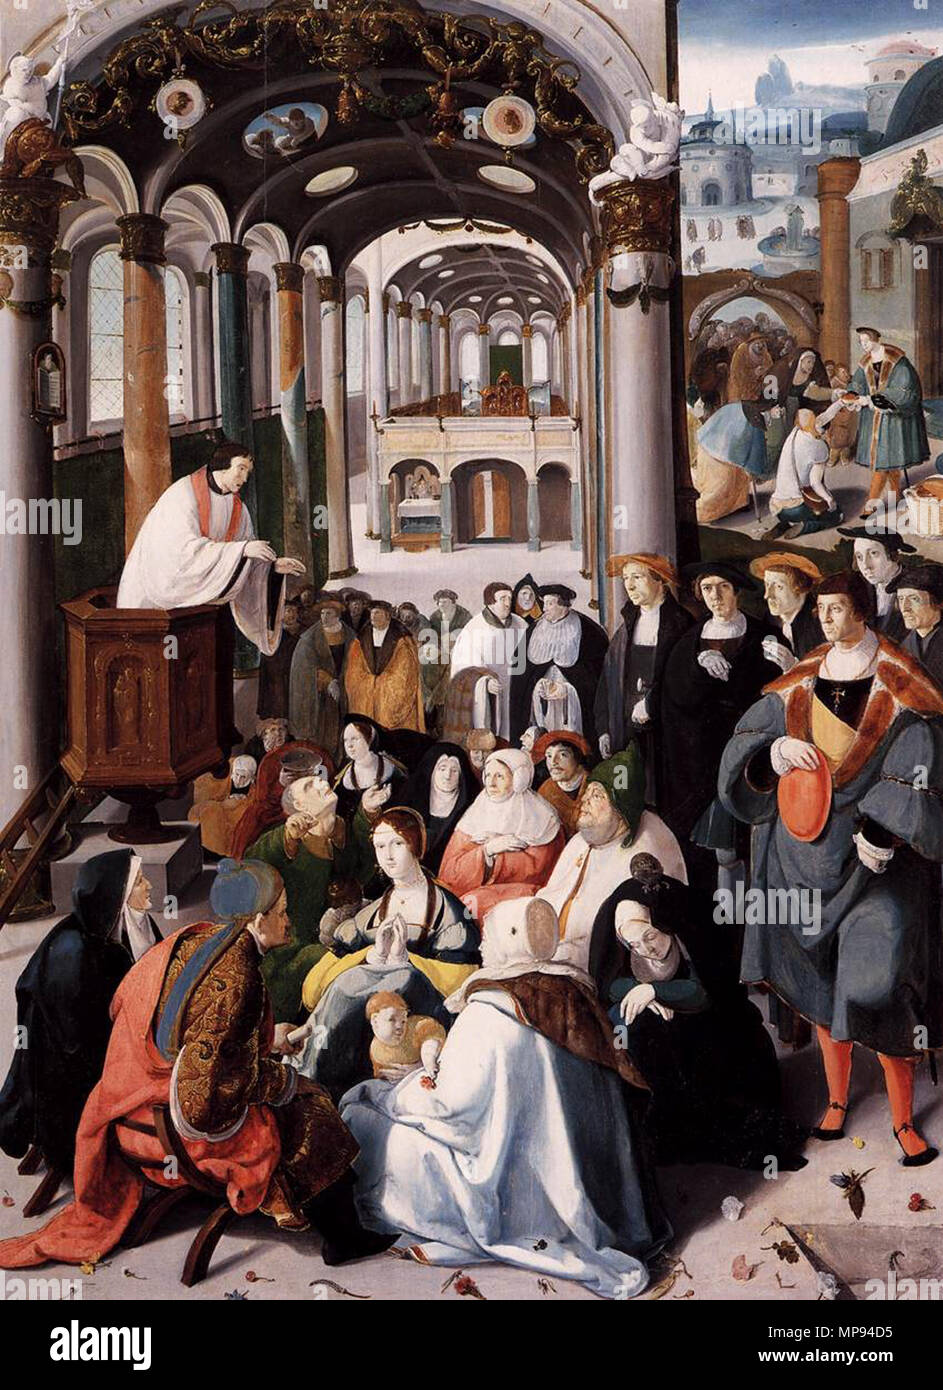 The Calling of Saint Anthony. The calling of Saint Anthony. View into a church where a priest wearing a surplice is preaching from his pulpit to a group of men and women. Behind the priest hangs a small painting showing Moses holding the Ten Commandments. The foreground is sprayed with flowers. To the right Saint Anthony is standing listening to the sermon as are five other men behind him, who seem to be the donors of the painting. In the background Saint Anthony is handing out bread to the poor and the crippled. Further inside the church a rood screen stands, separating the nave from the choi Stock Photo